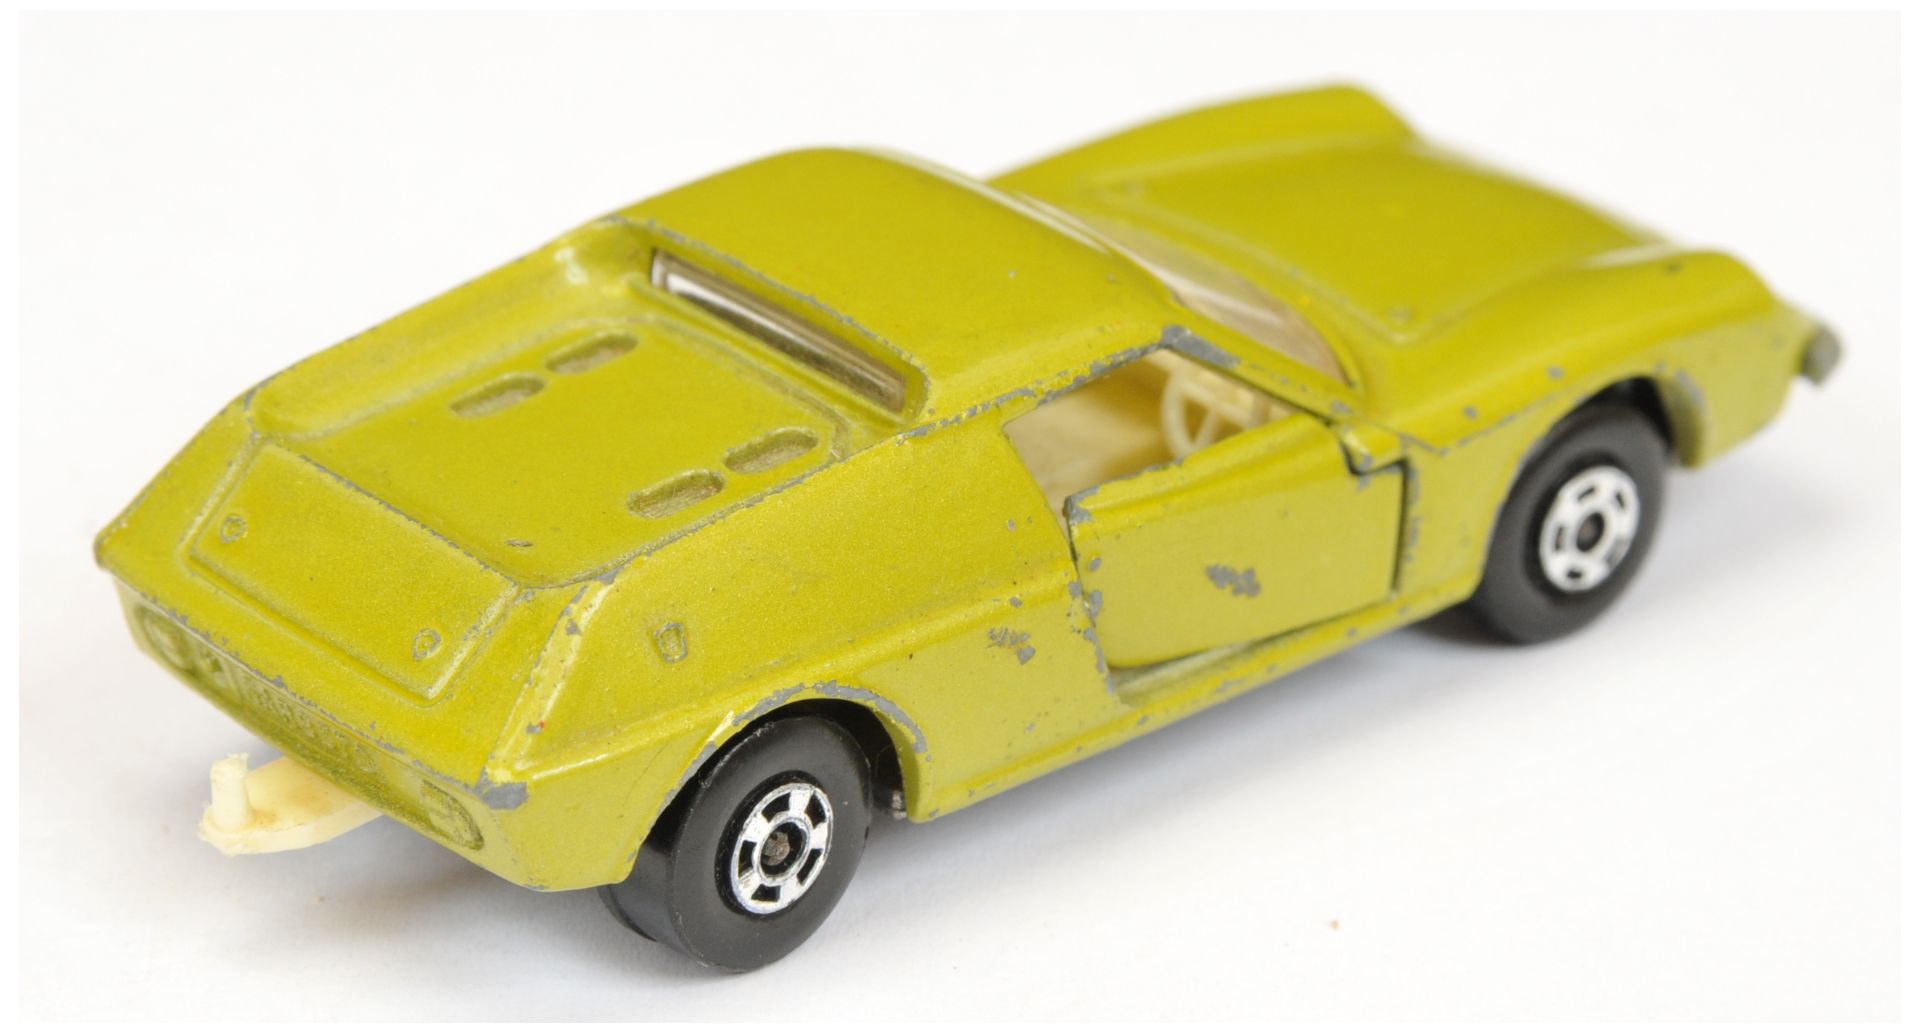 Matchbox Superfast 5a Lotus Europa Made in Brazil Issue - Image 2 of 3